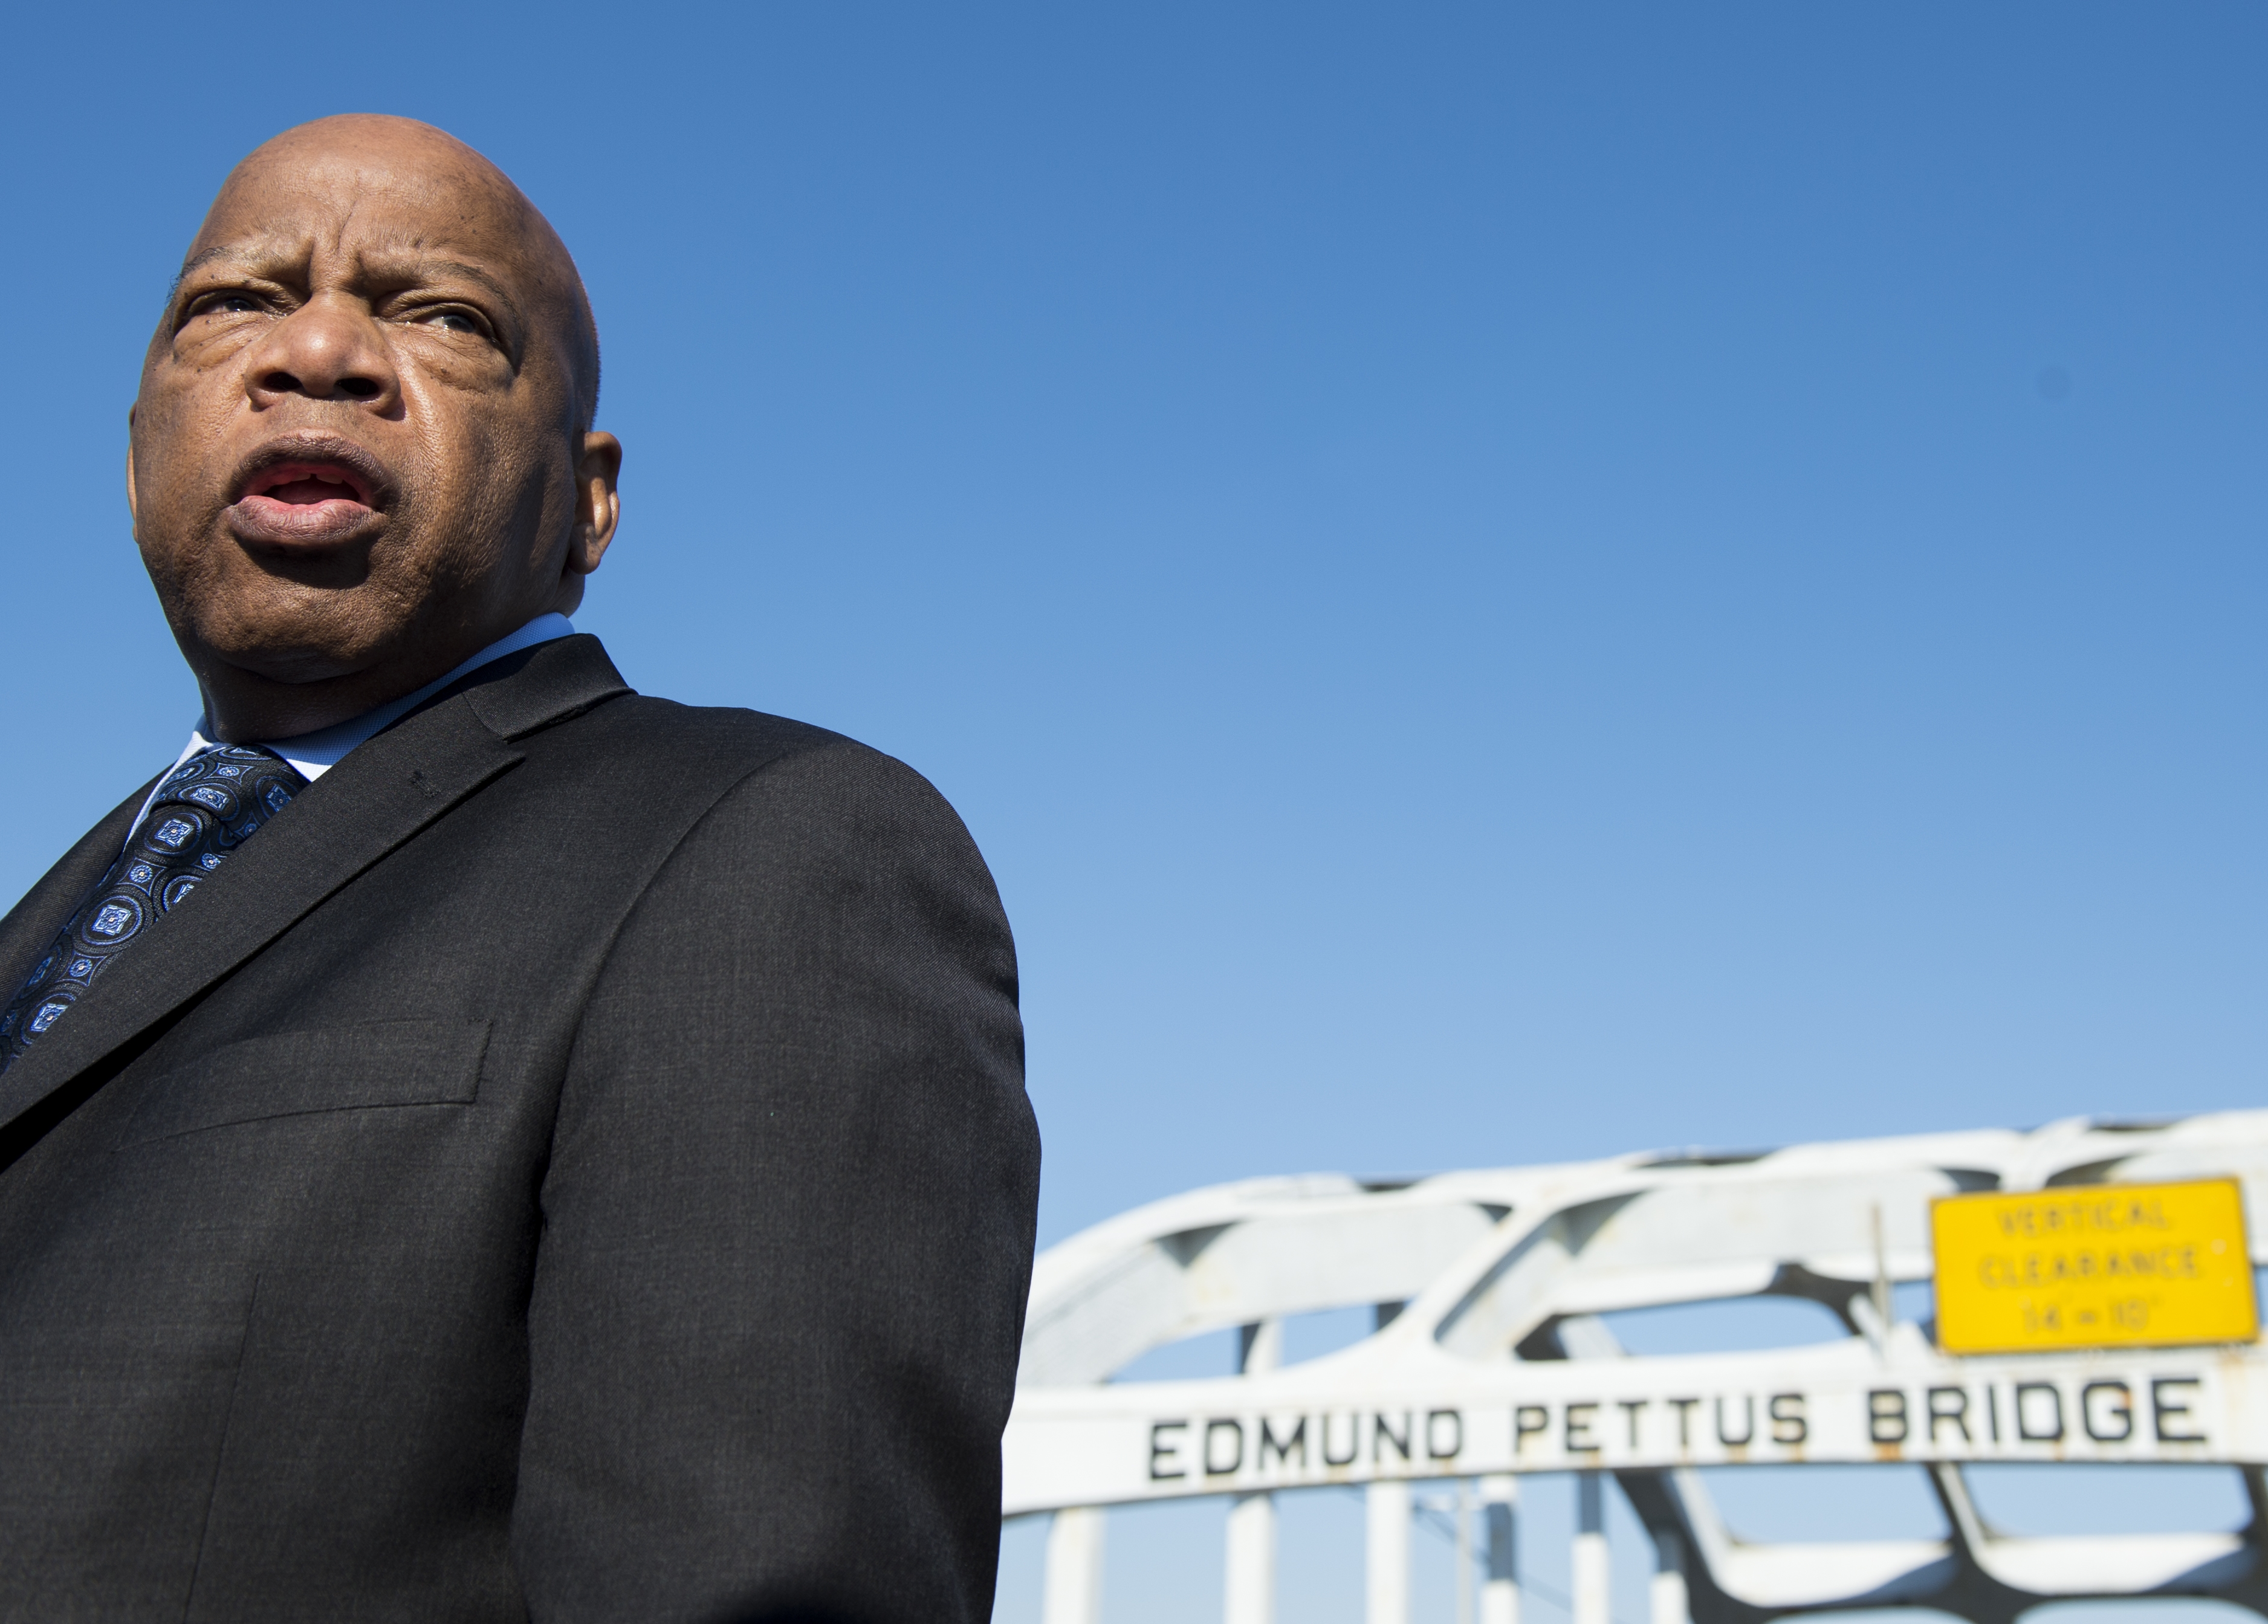 Rep. John Lewis, Real Life Icon, Reminds Us Why It’s Important To Vote